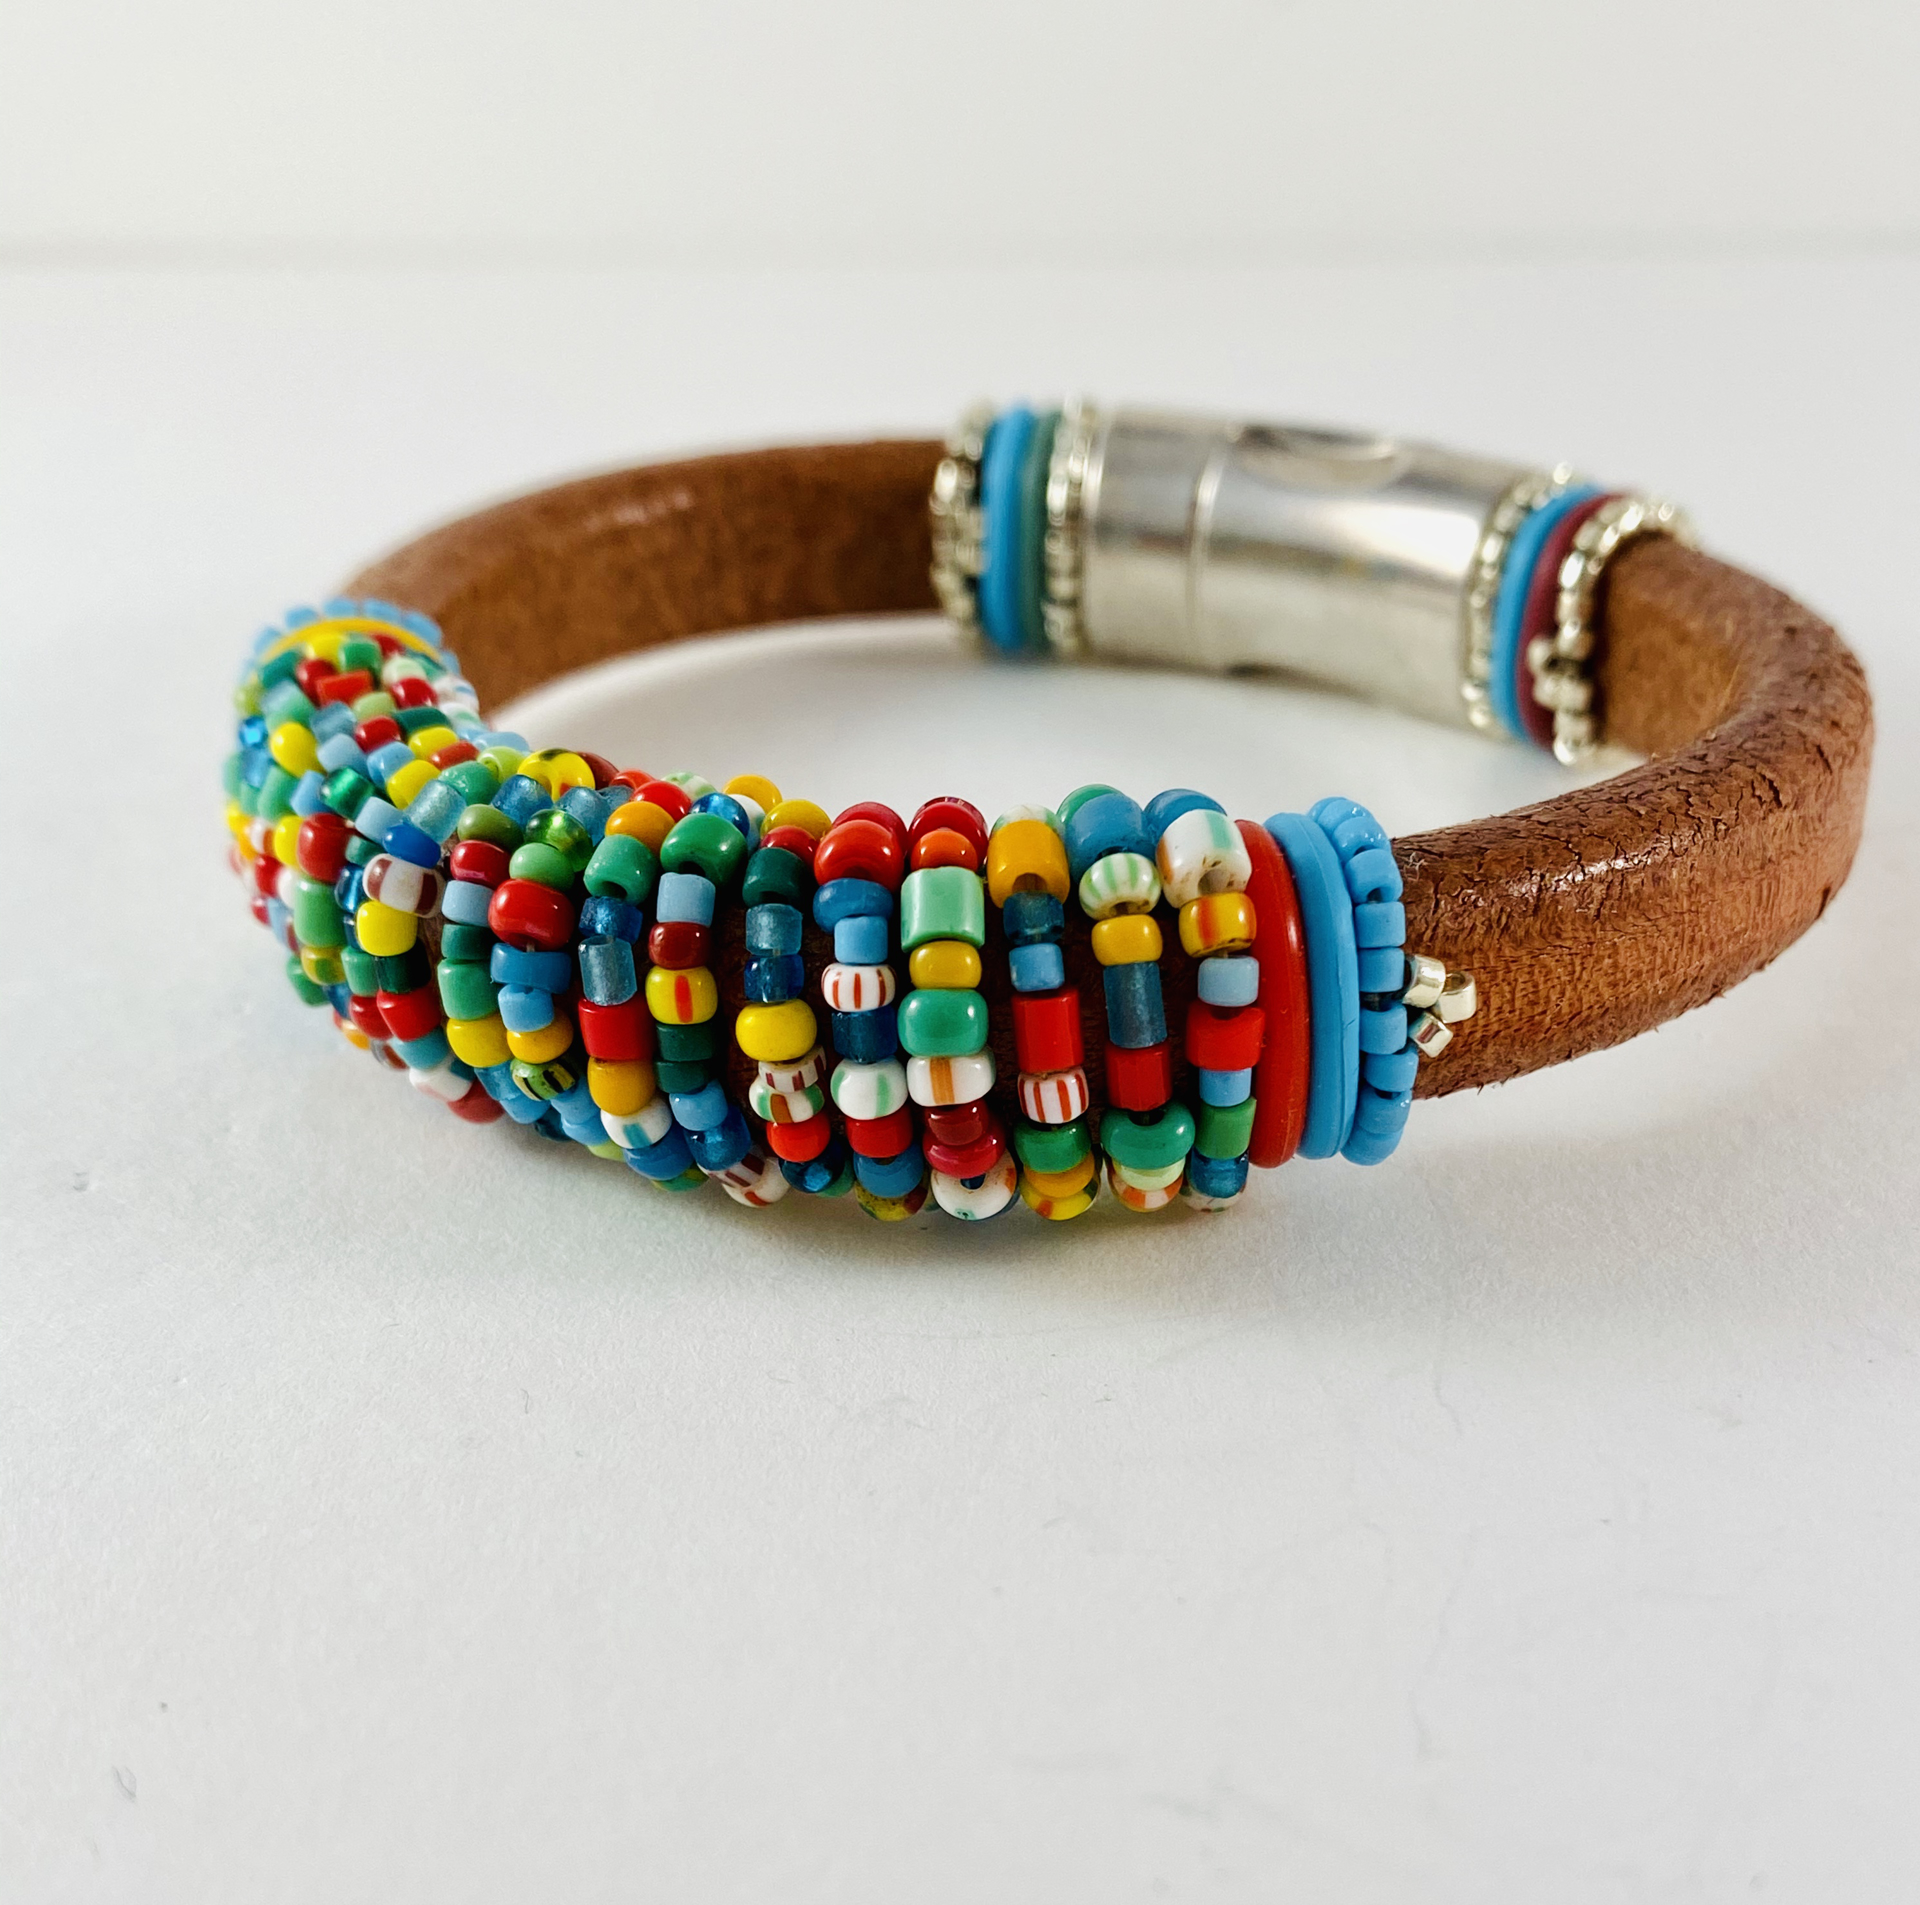 African Trade Bead Bracelet by Barbara Duimstra